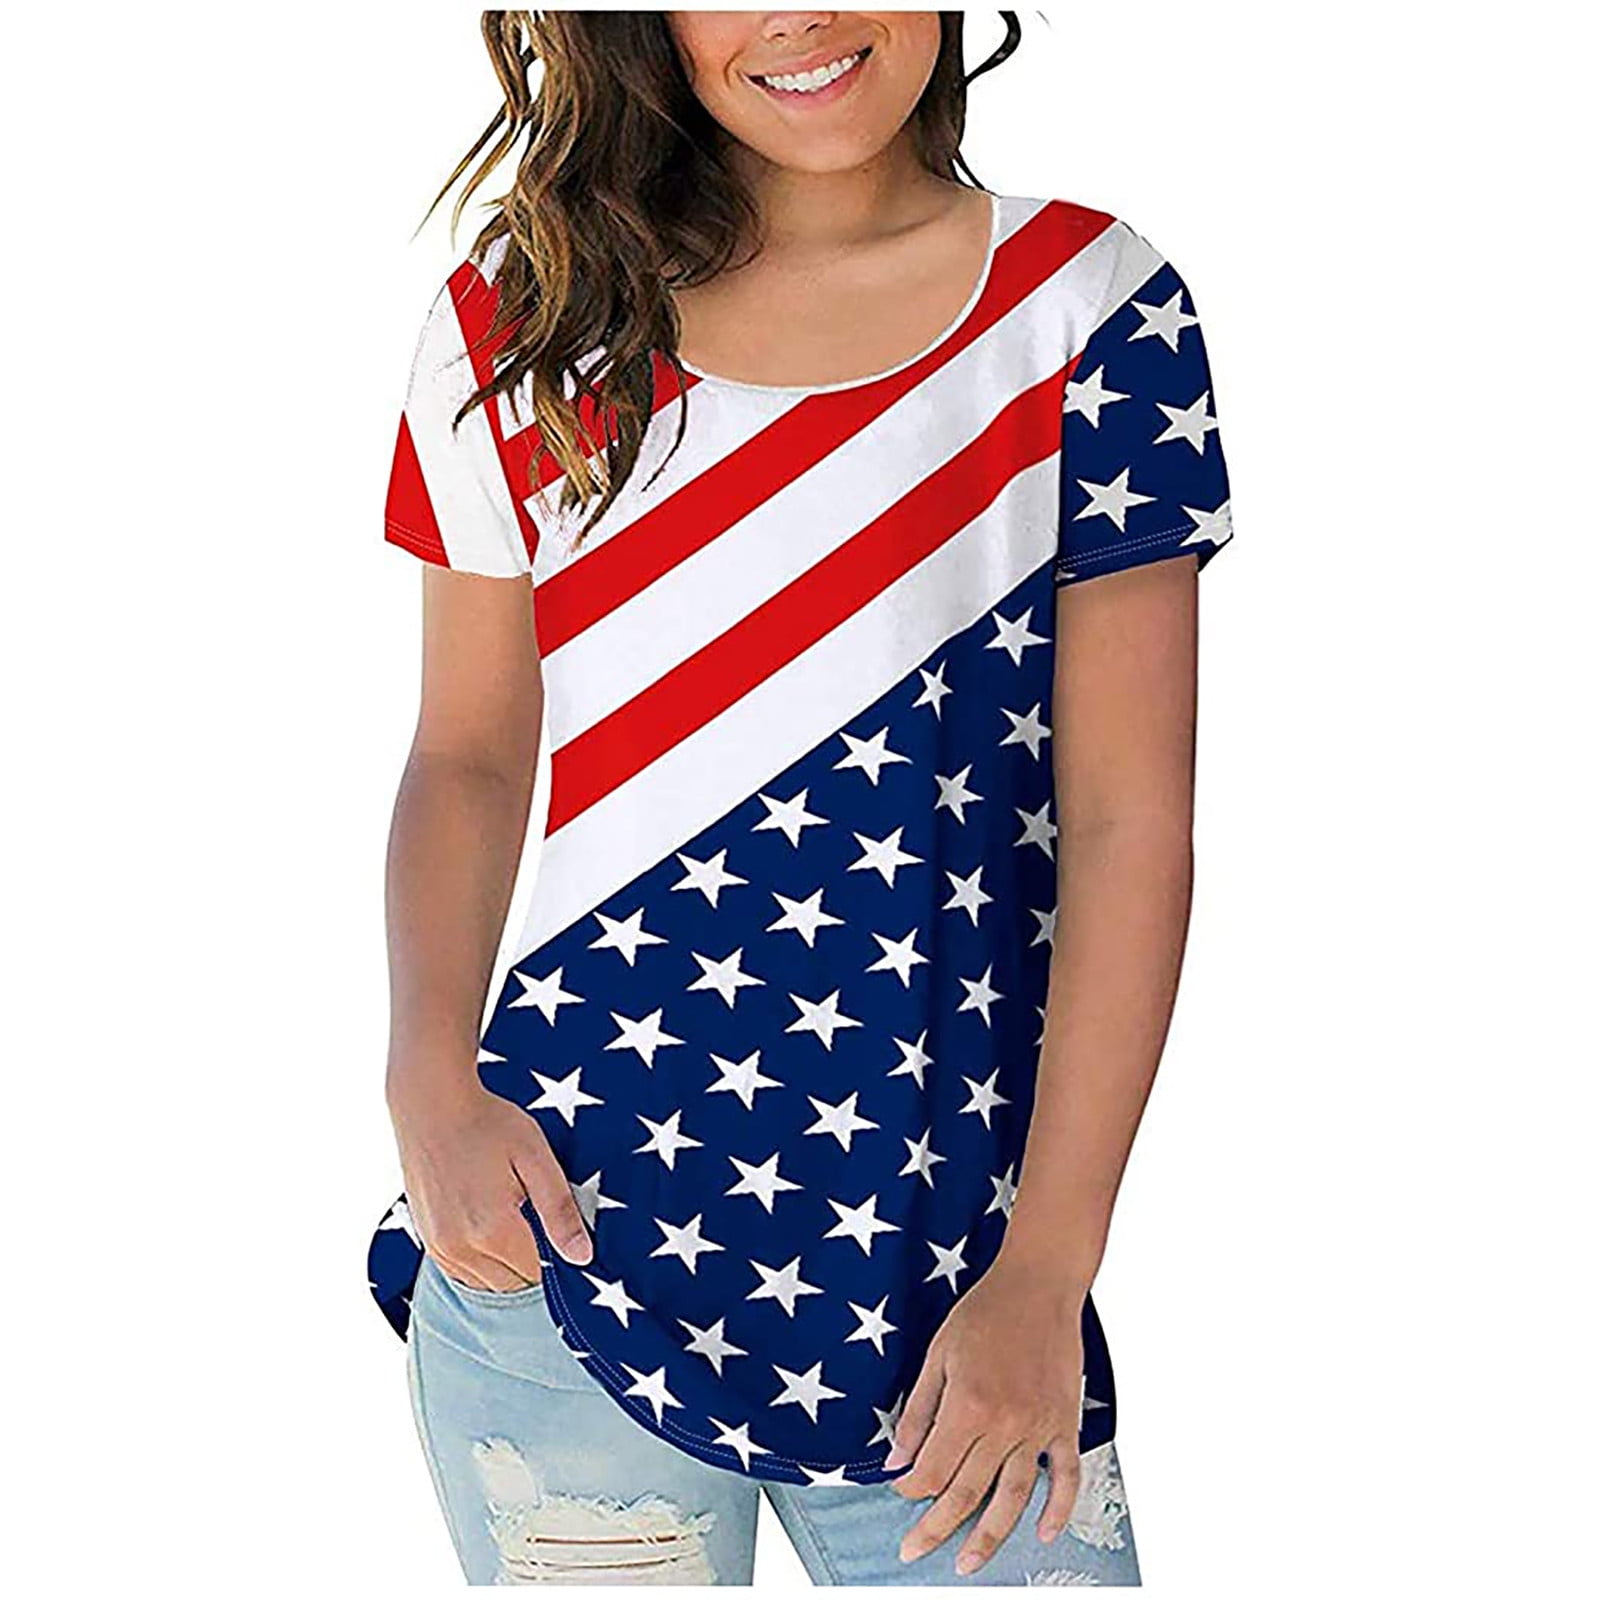 Womens American Flag Tank Top Loose Stars and Stripes Print Tunic Tops Patchwork 4th of July Patriotic Swing Casual Soft Tee Blouses Plus Size 